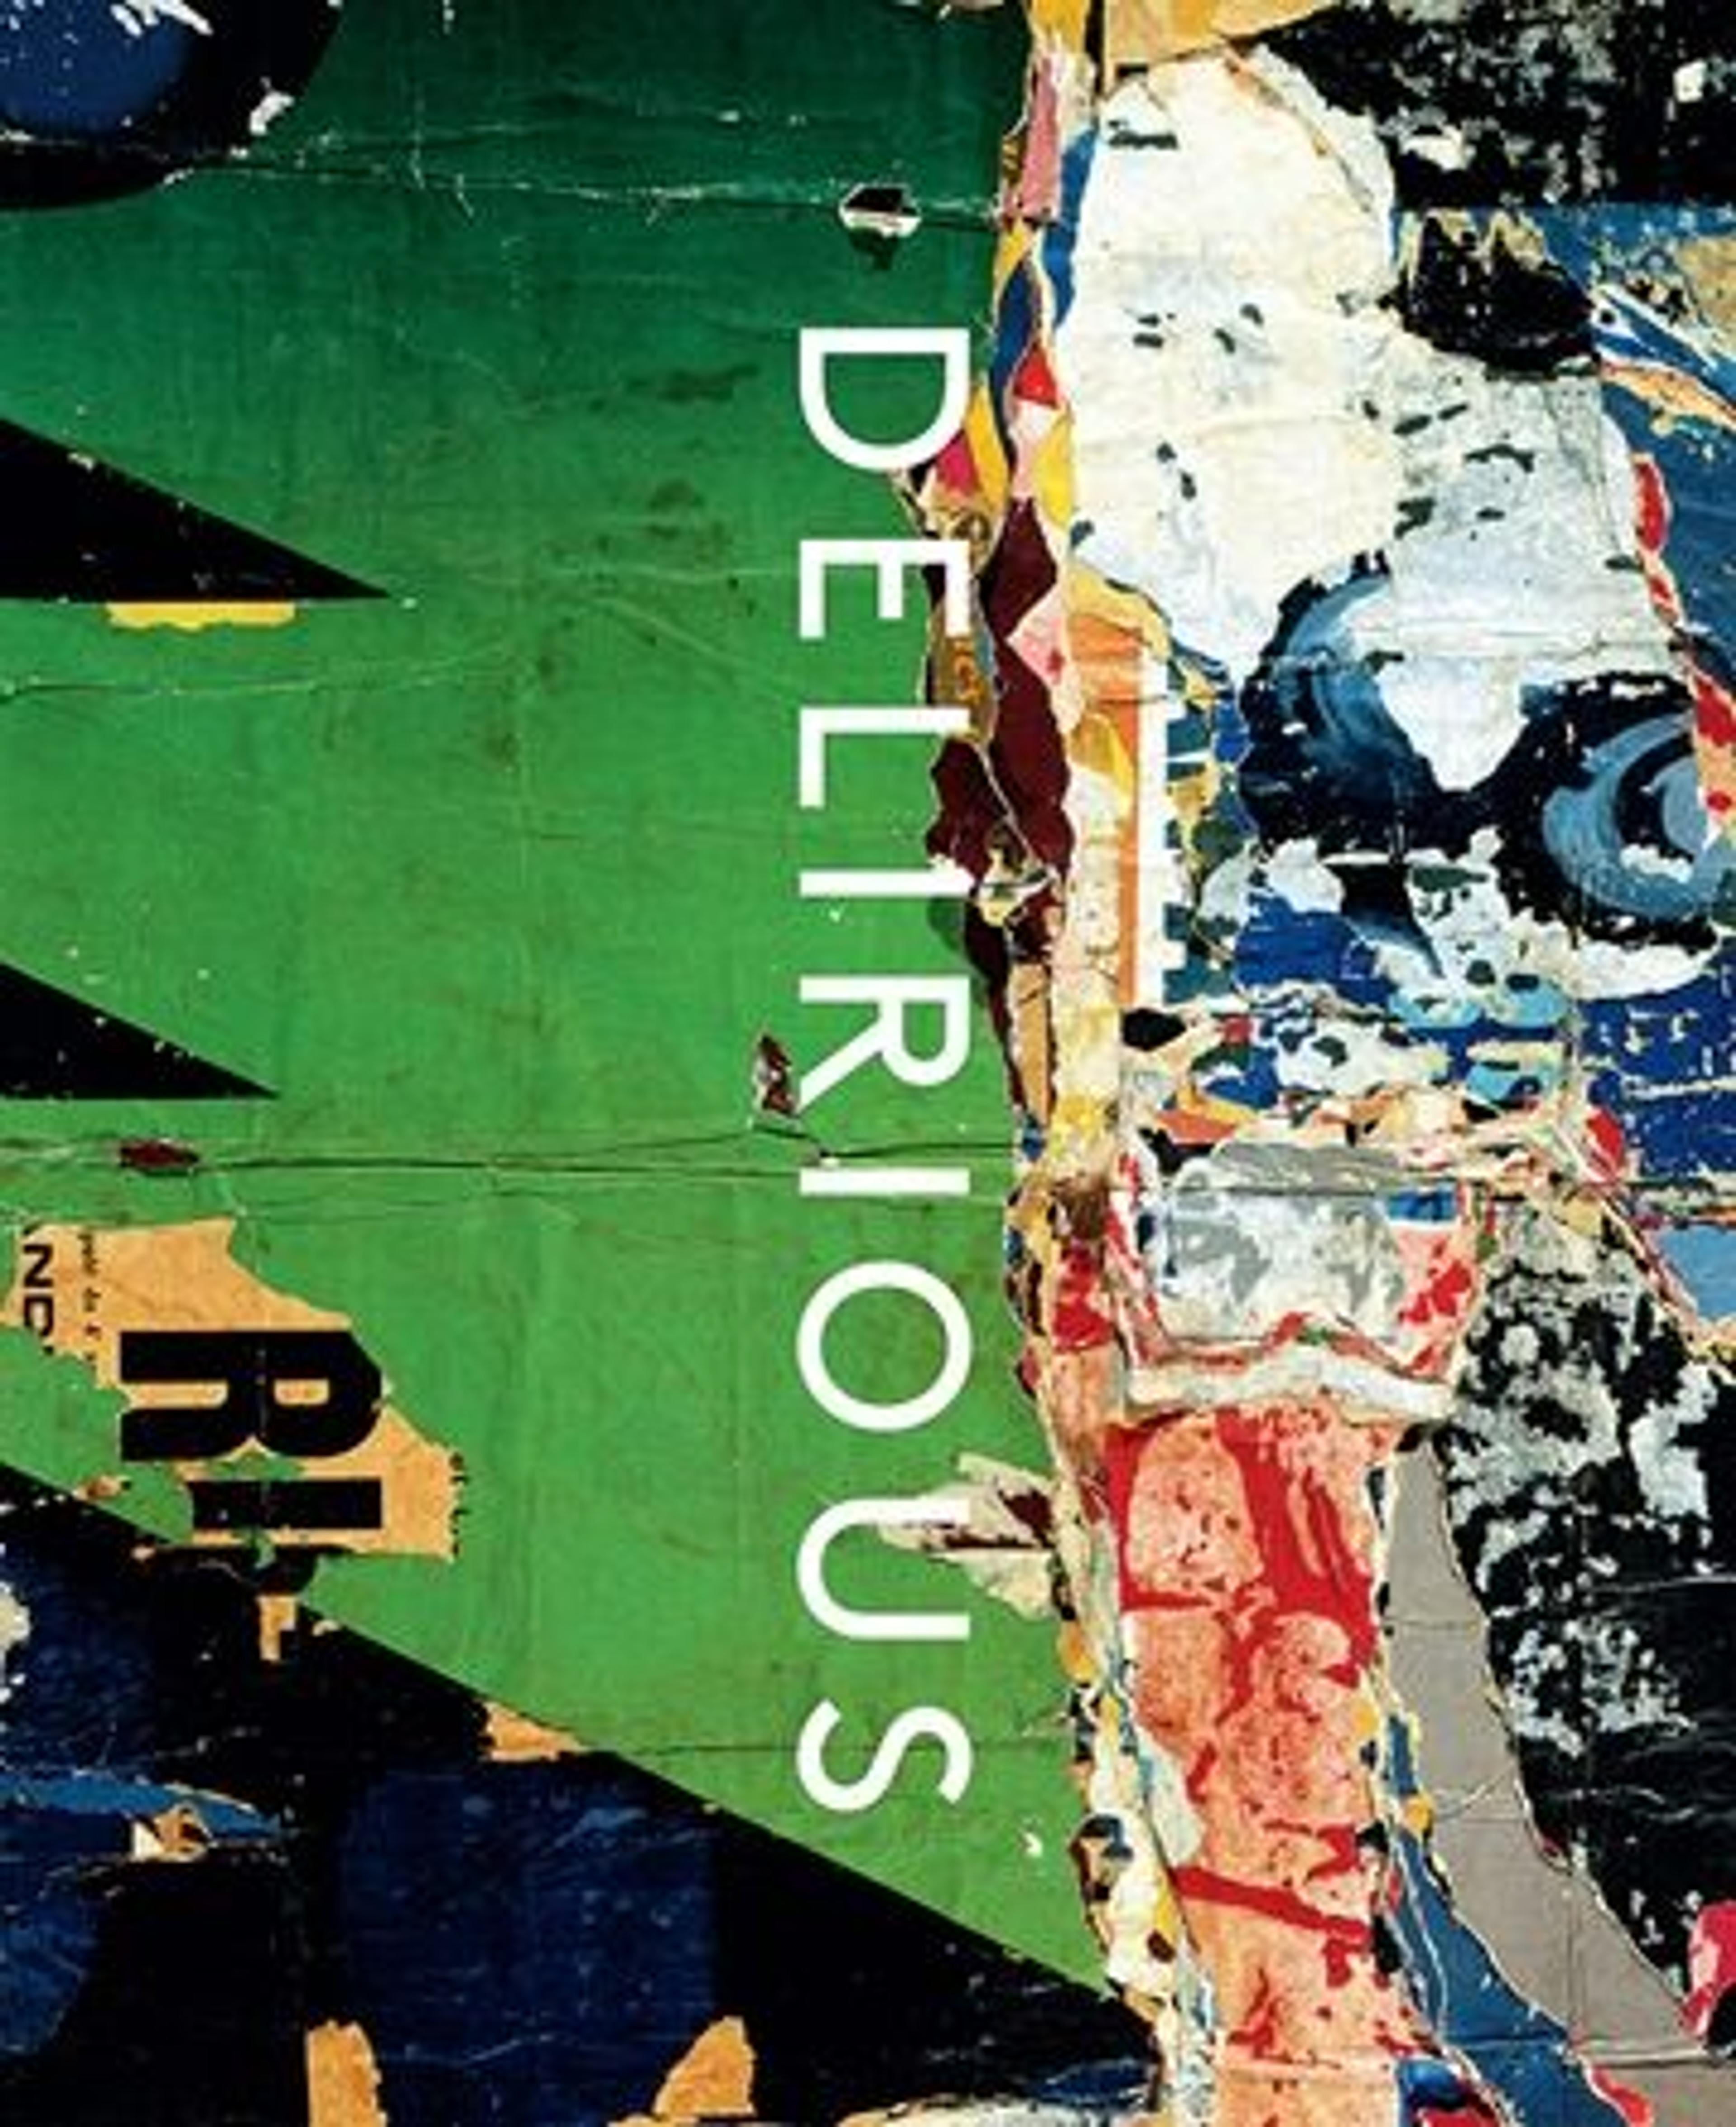 Cover of the exhibition catalogue for Delirious: Art at the Limits of Reason